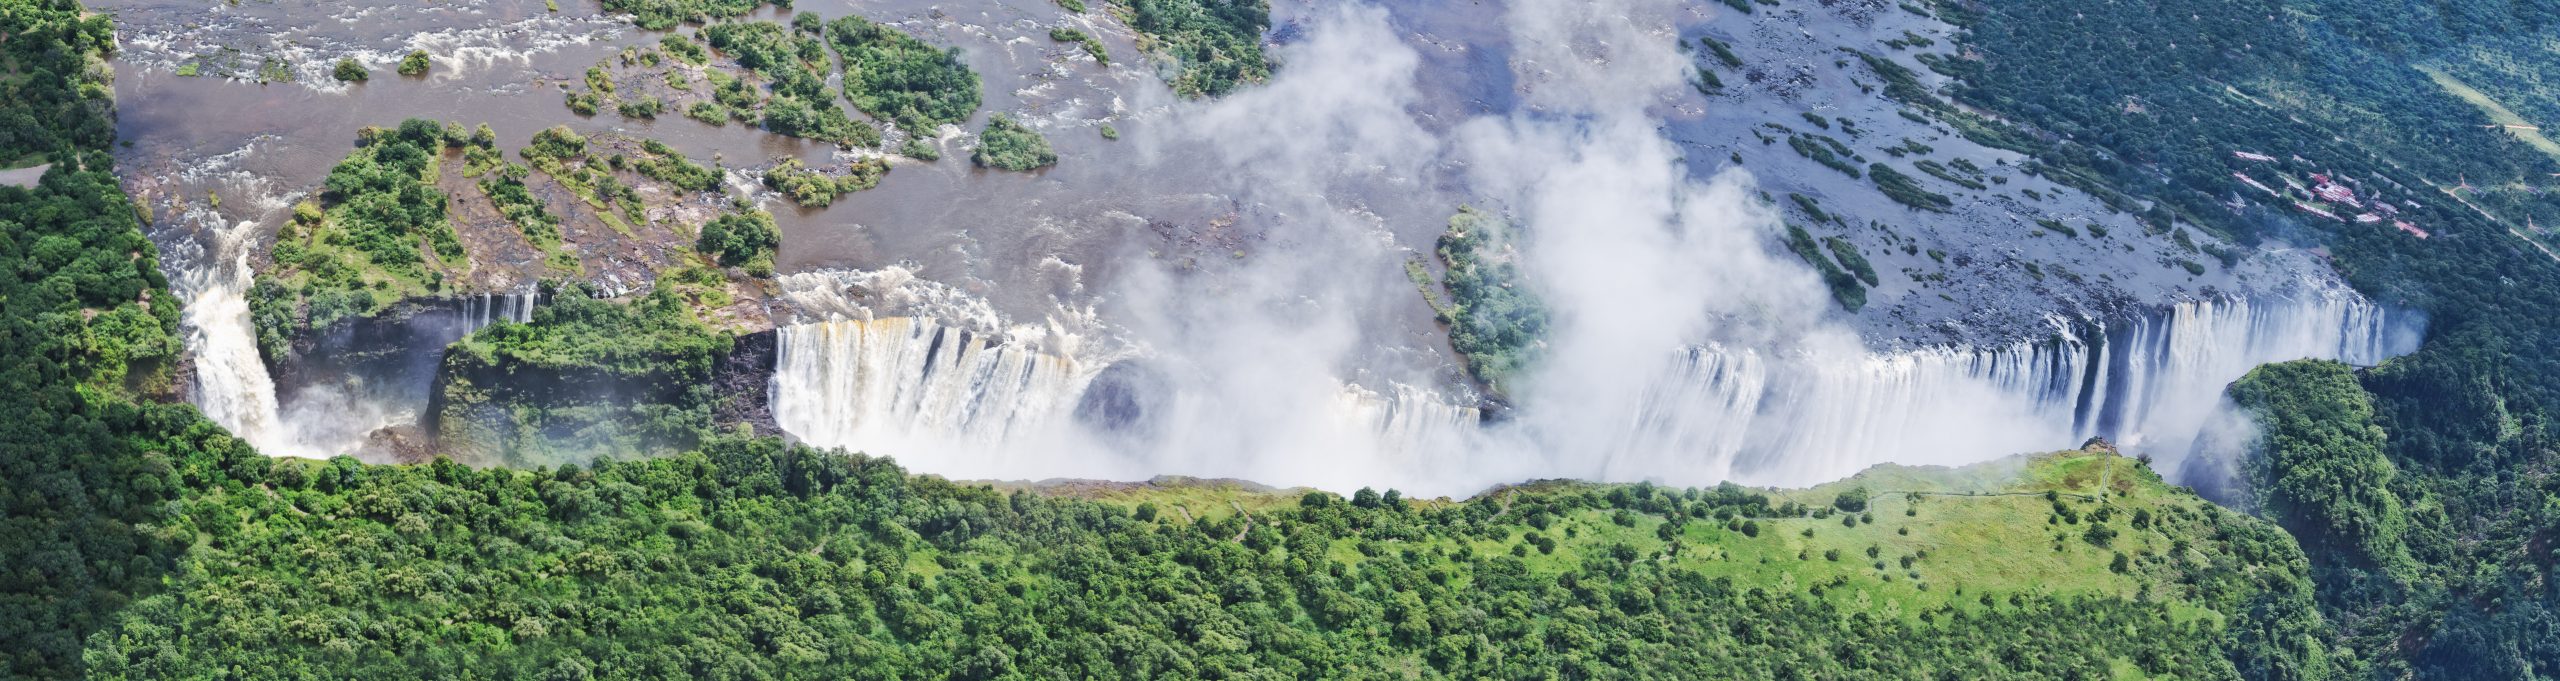 Passport to Victoria Falls | Travel to the ‘Place of the Rainbows’